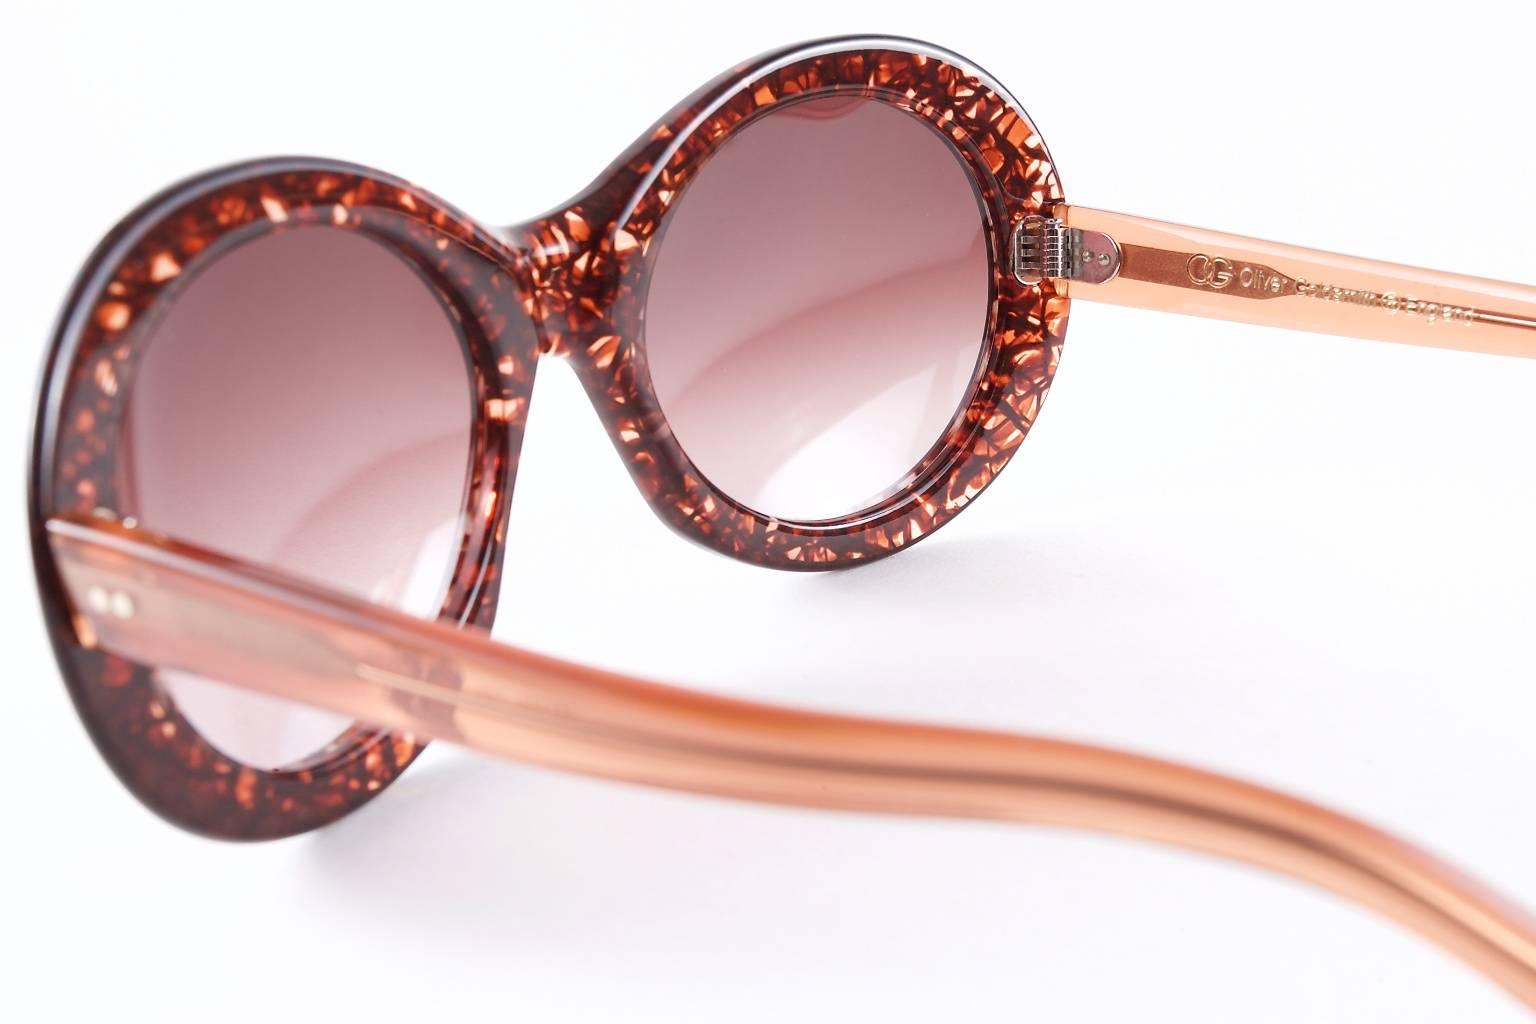 Originally created in 1963 and worn by the screen legend Audrey Hepburn, this elegant vintage-style frame is updated for the 21st century with a lightweight scratch-resistant plastic lens. Handmade in Japan.

Measurements: